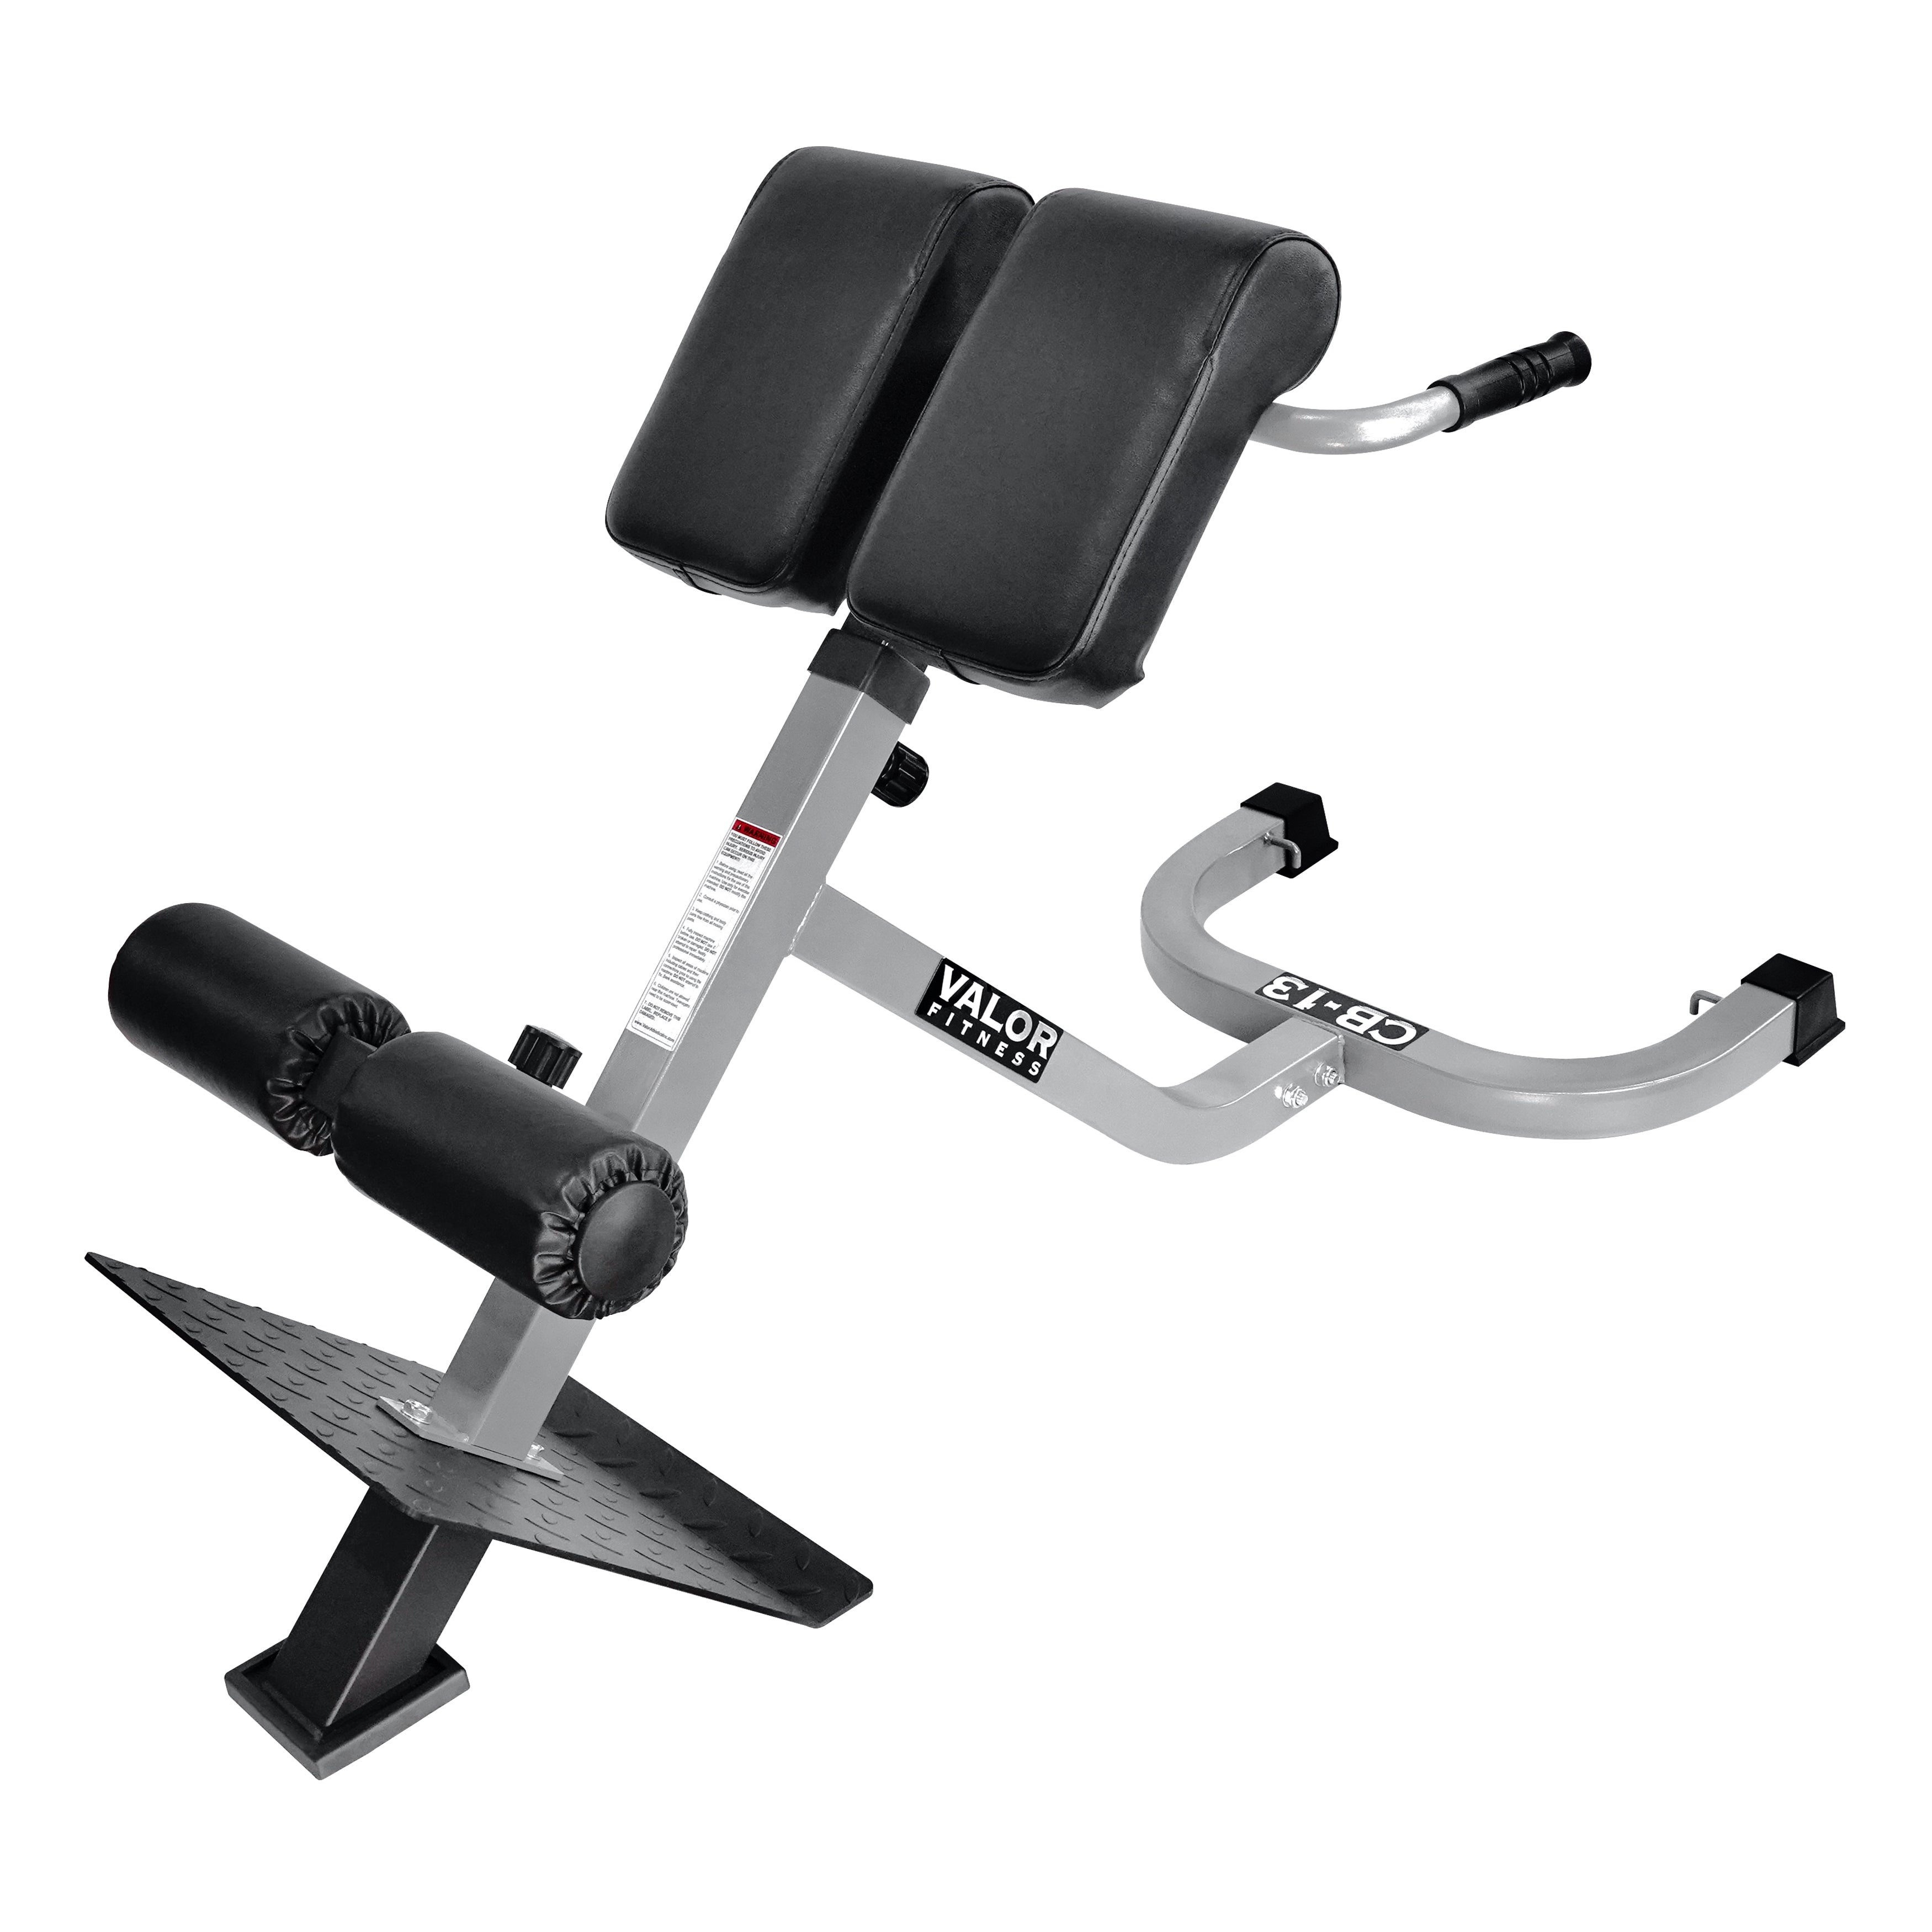 CB-13 Adjustable Back Extension Bench for Fitness